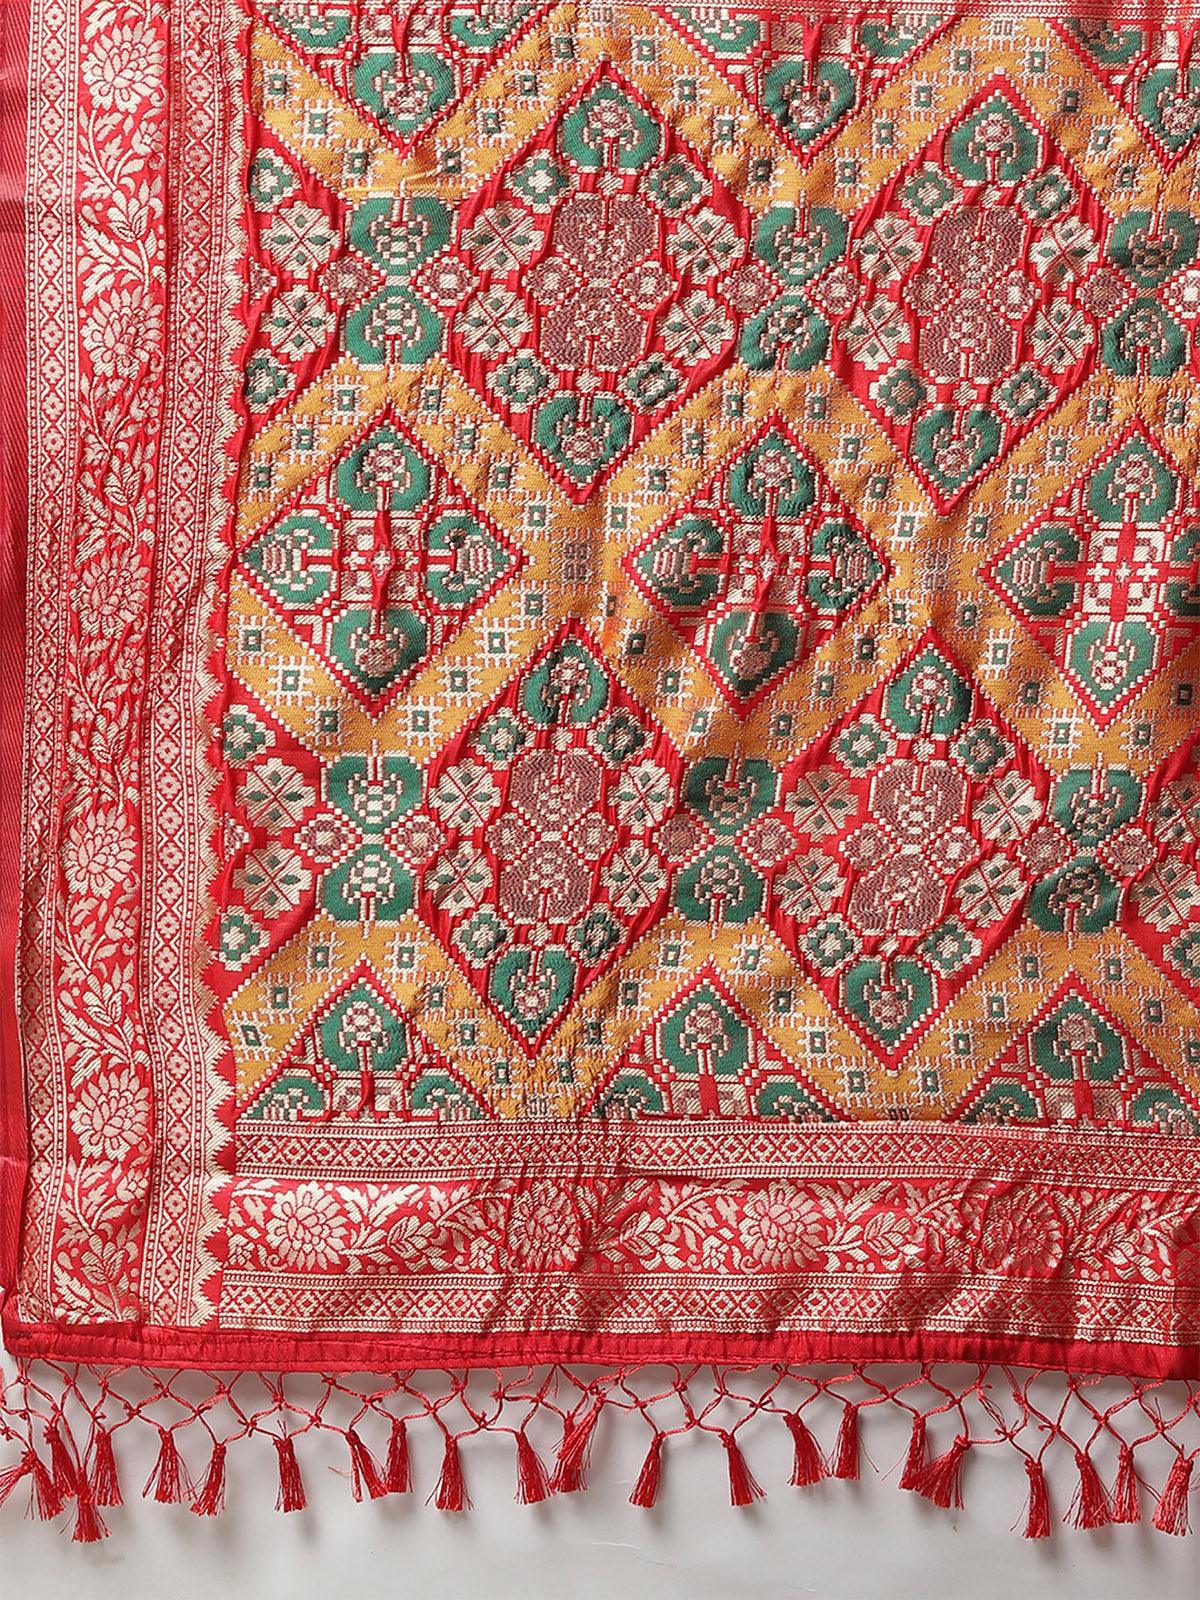 Women's Silk Blend Red Woven Design Woven saree With Blouse Piece - Odette